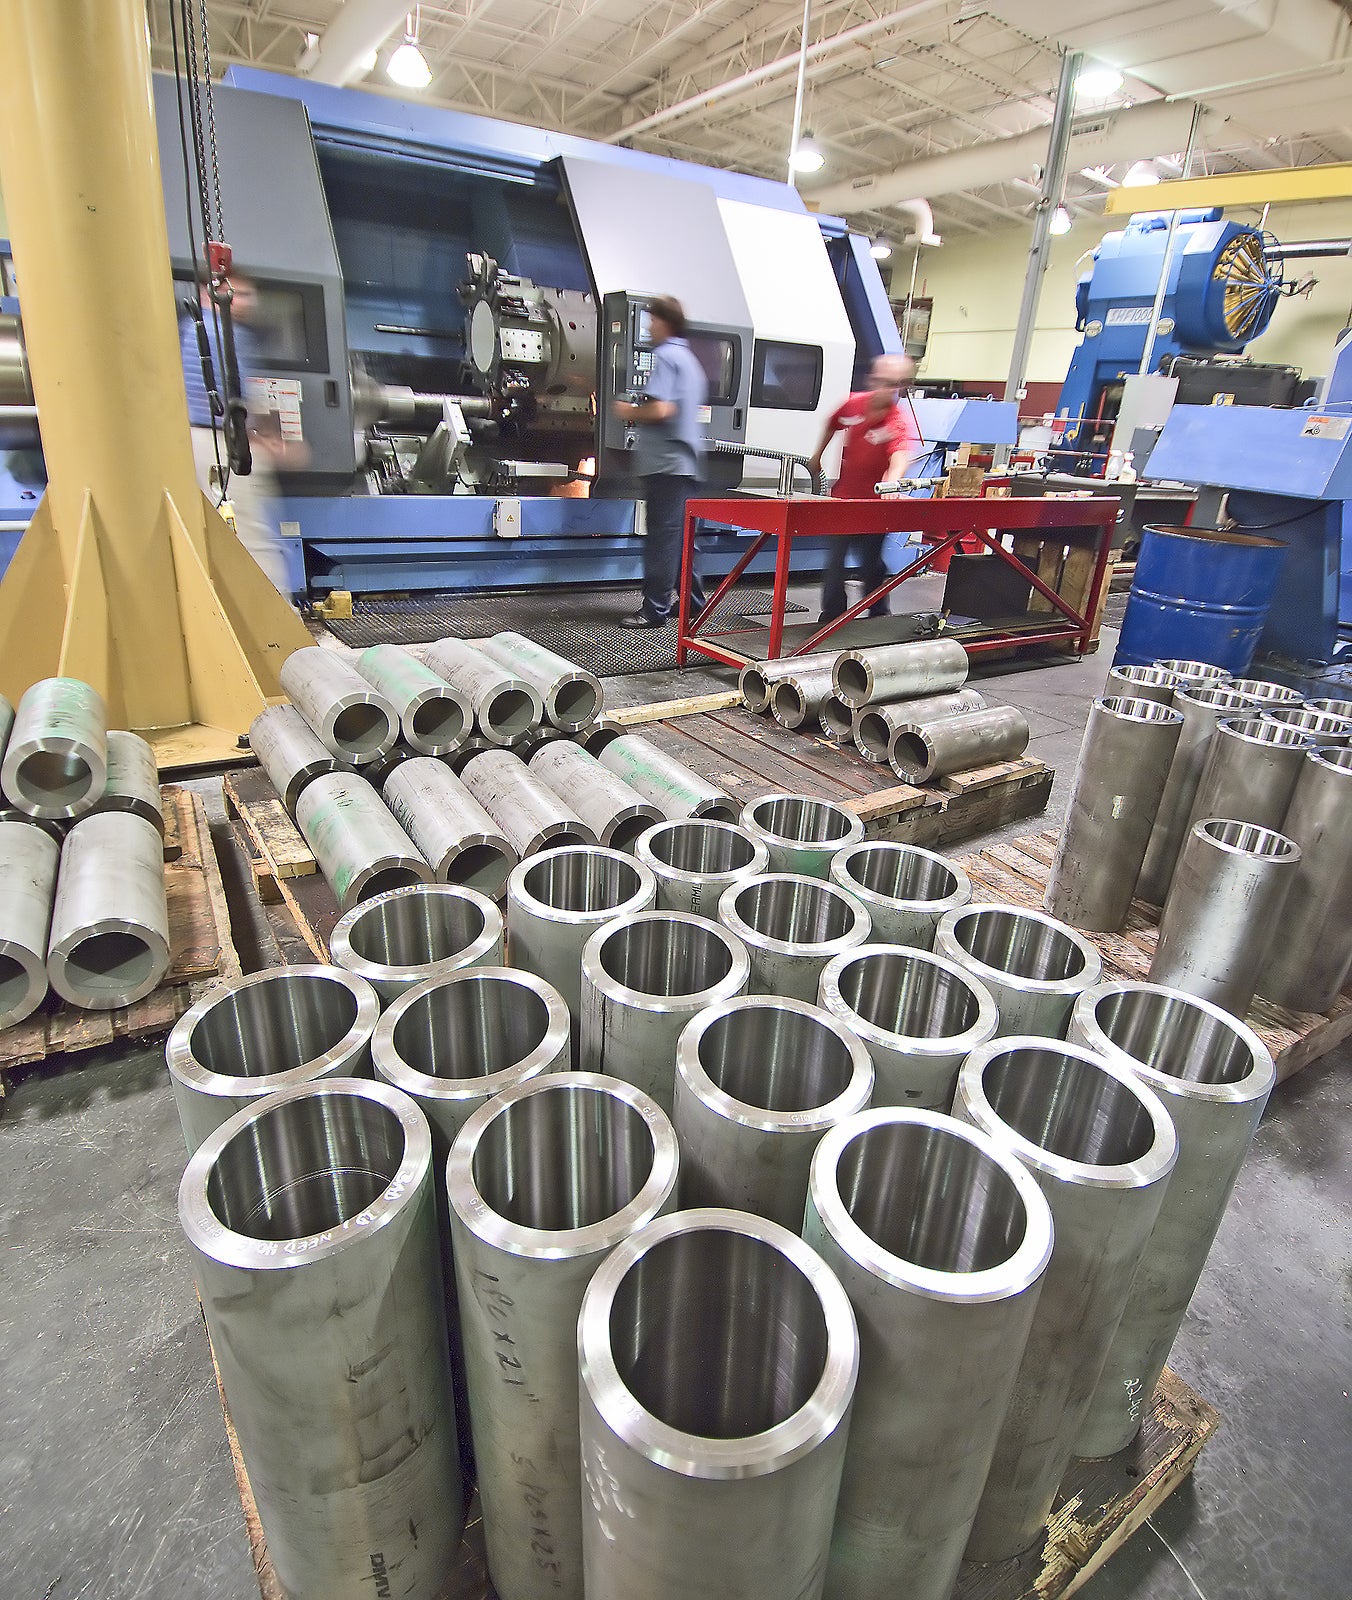 Big lathe cutting stainless steel tubes with workers in the background
** Note: Slight blurriness, best at smaller sizes